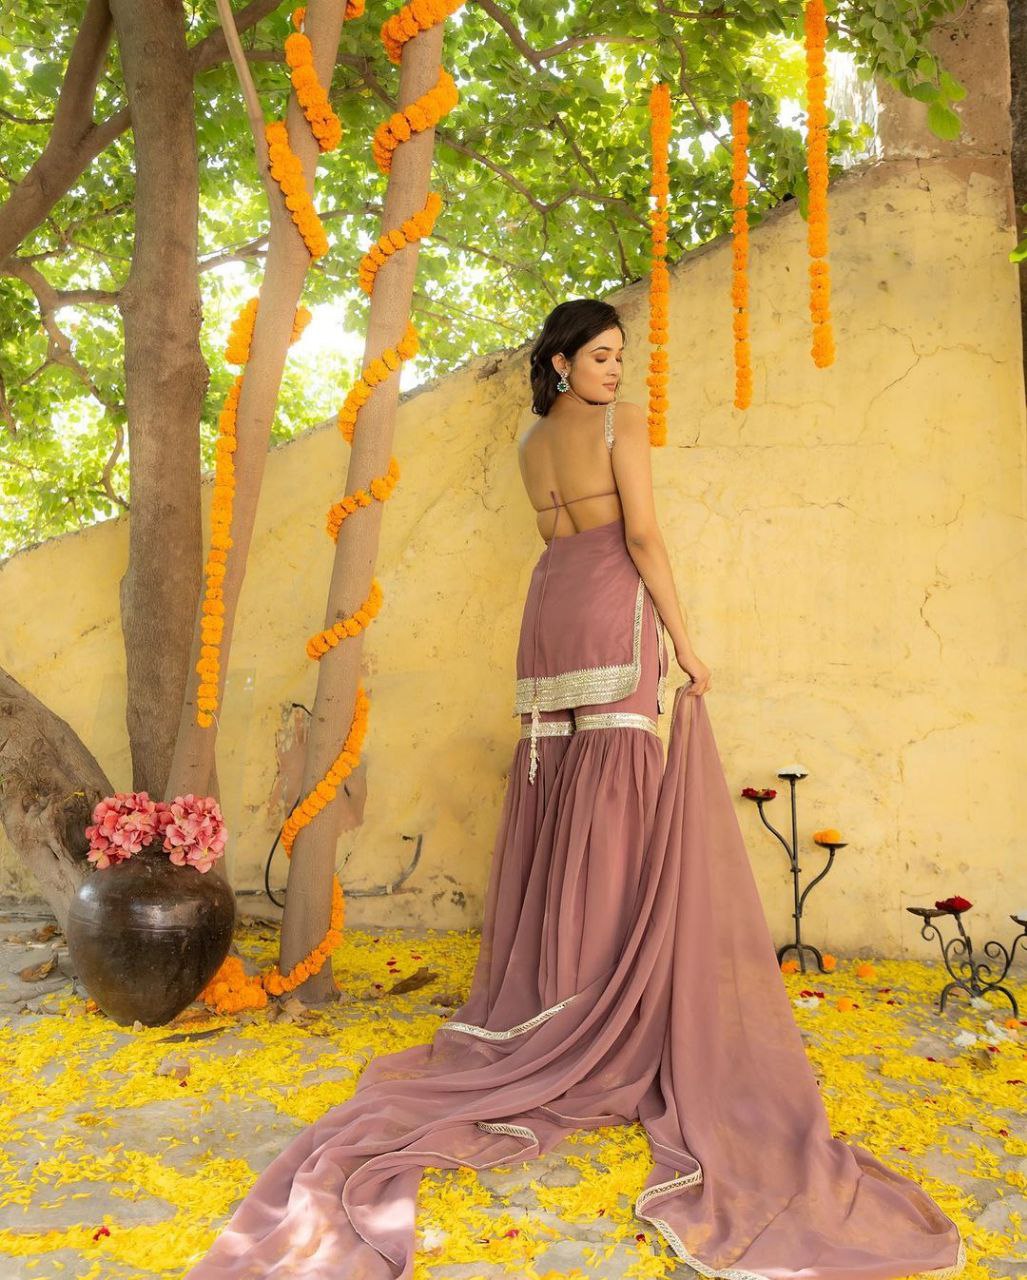 Free Photos - A Woman With Dark Hair Wearing A Stylish Blue Dress, Possibly  An Indian Saree, As She Poses Against A Yellow Wall. Her Expression And Pose  Create An Elegant And